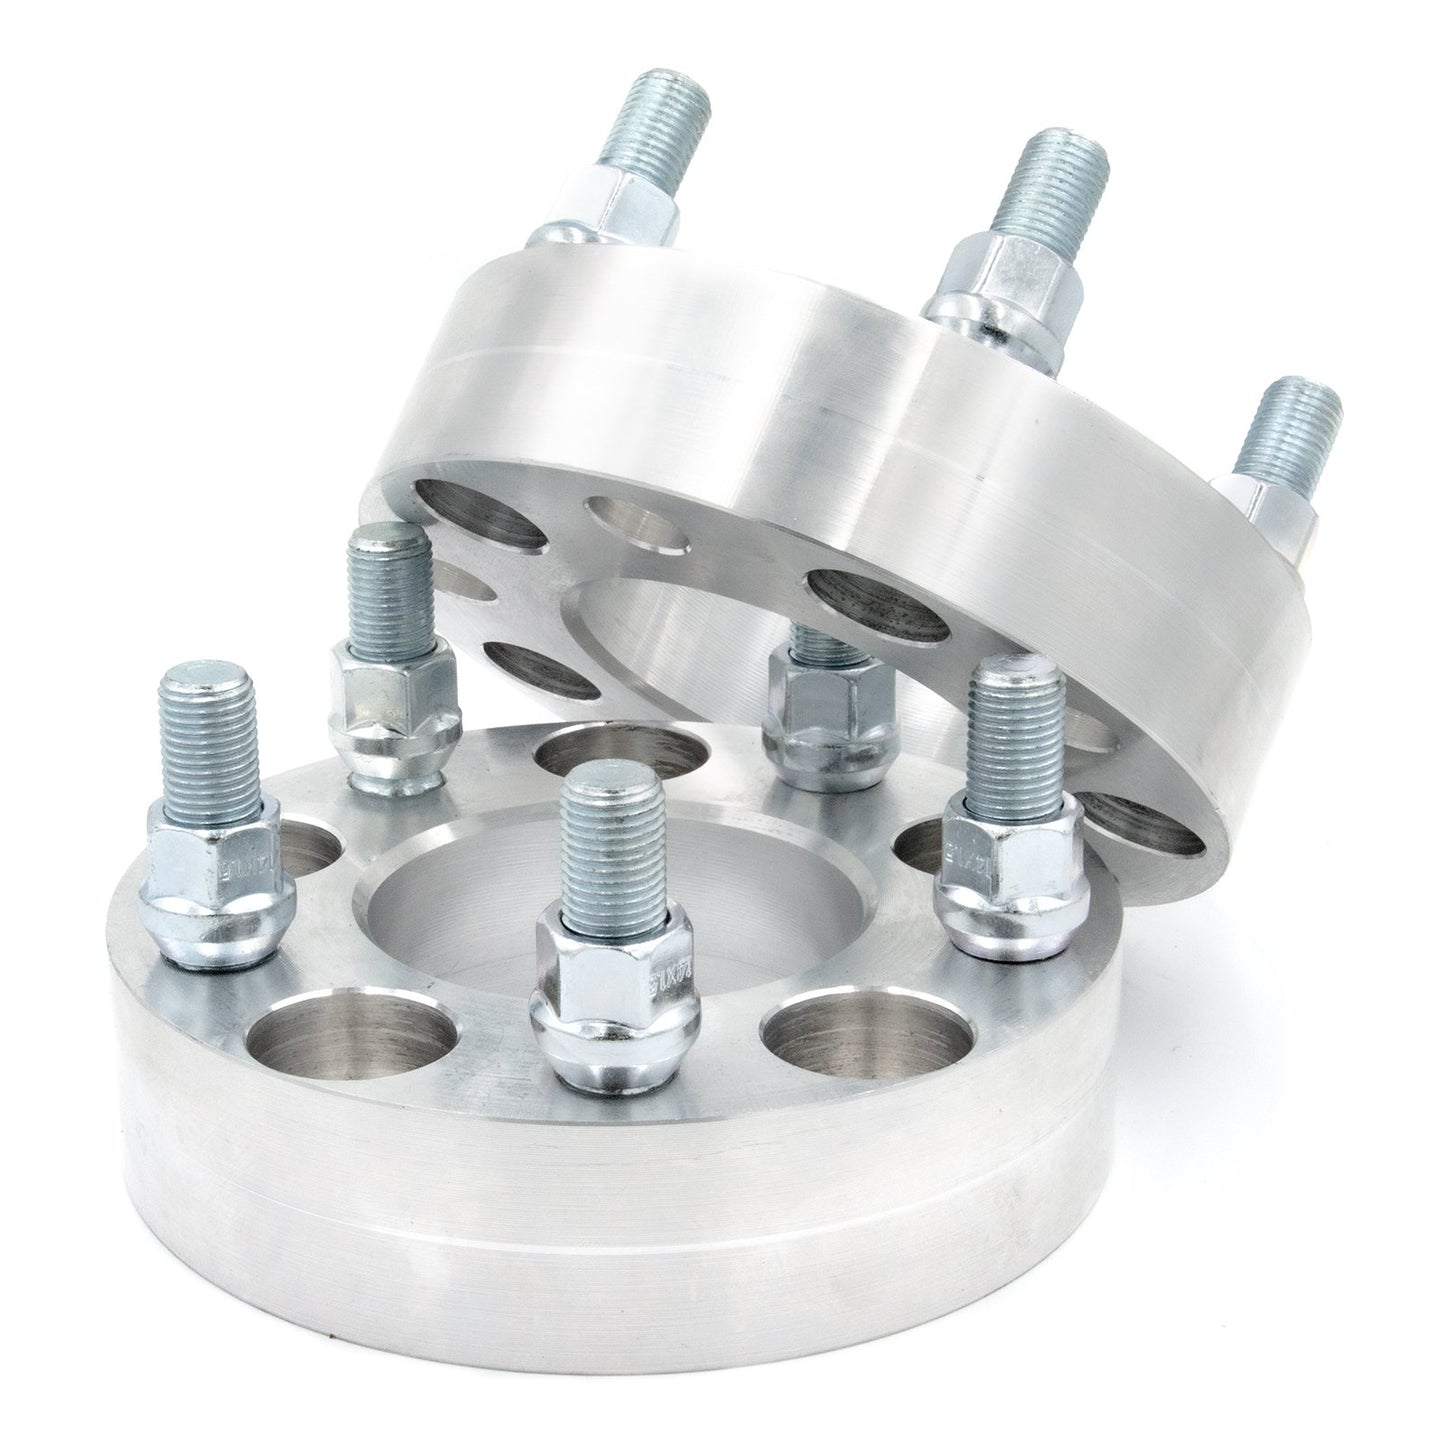 5x100 to 5x120 Wheel Spacer/Adapter - Thickness: 3/4"- 4"